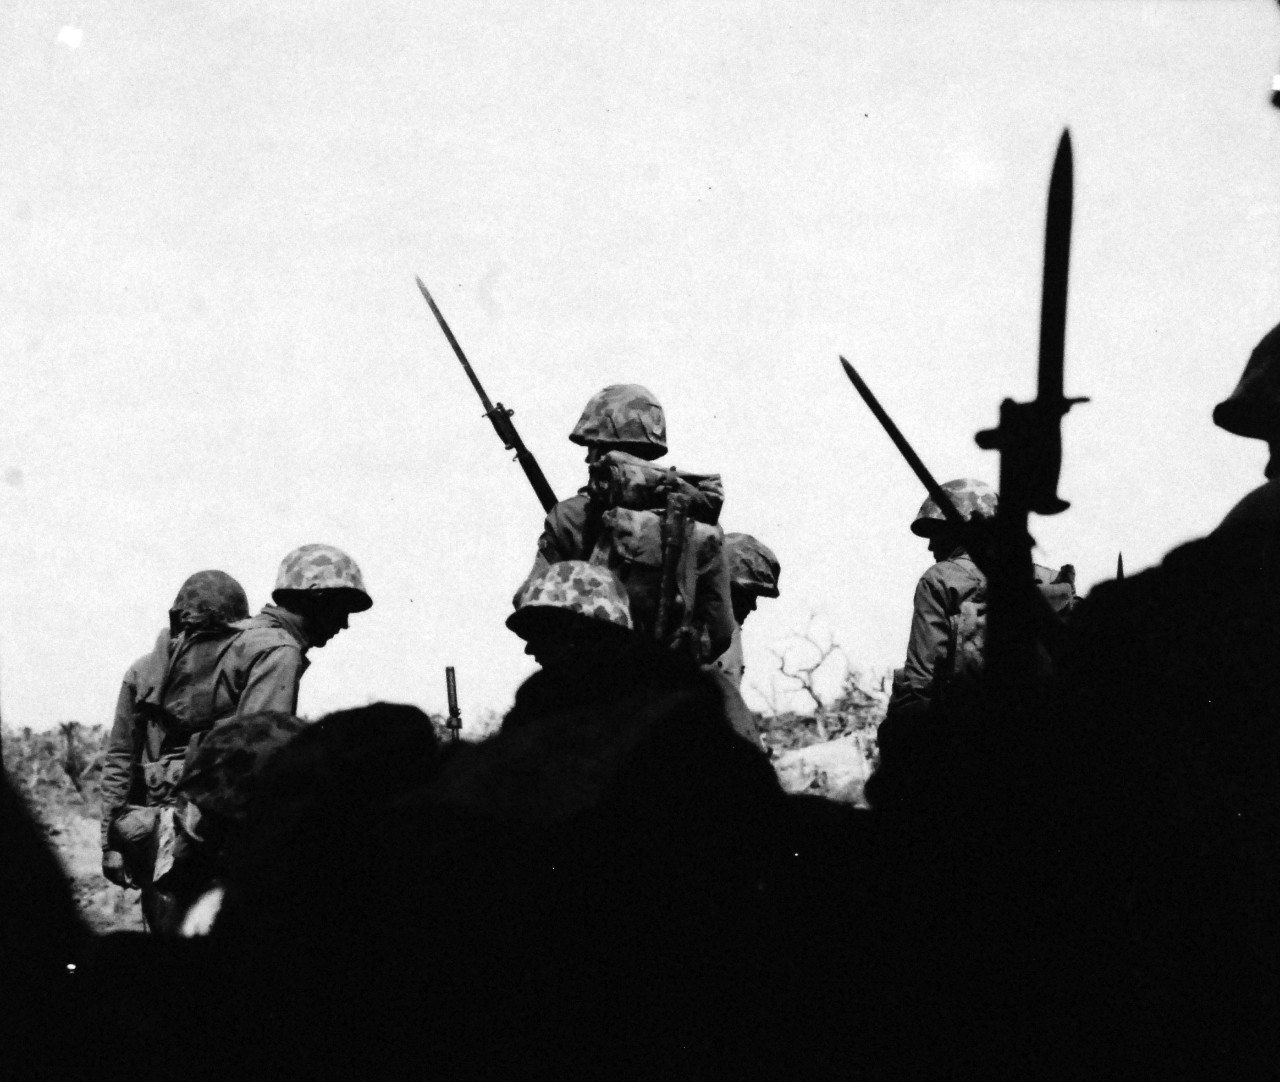 127-GW-306-142979:  Battle for Iwo Jima, February-March 1945. “K” Company, 23rd Marines move into front-line positions.  Photographed by Morejohn, 1945.  Official U.S. Marine Corps photograph, now in the collections of the National Archives.  (2016/02/17).